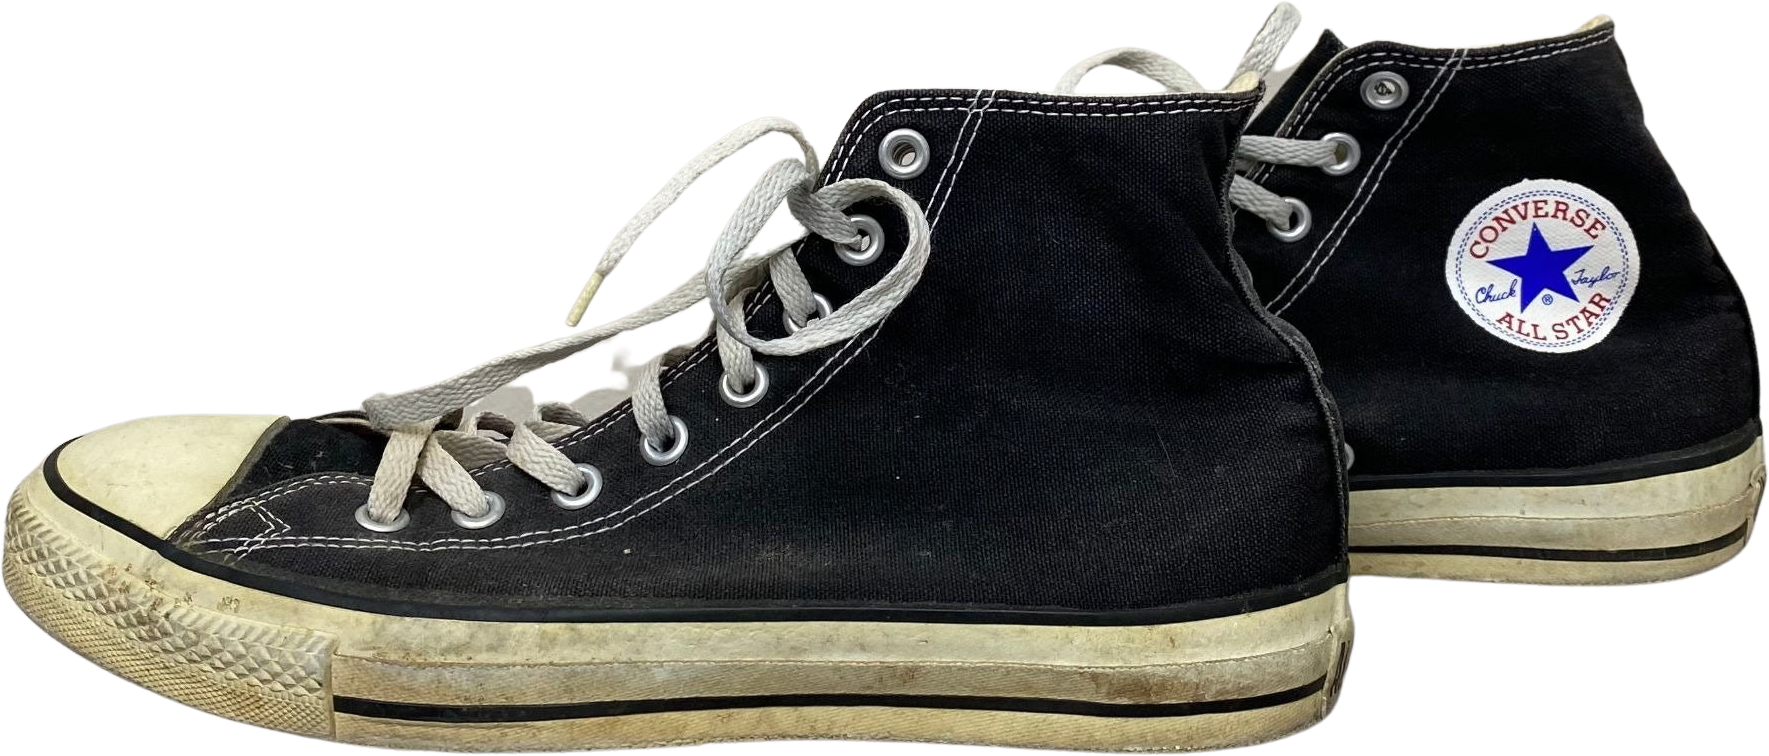 Pisoteando Galaxia Turbulencia Vintage 90s Converse All Stars Made In Usa Chuck Taylor Black High Top by  Conv | Shop THRILLING